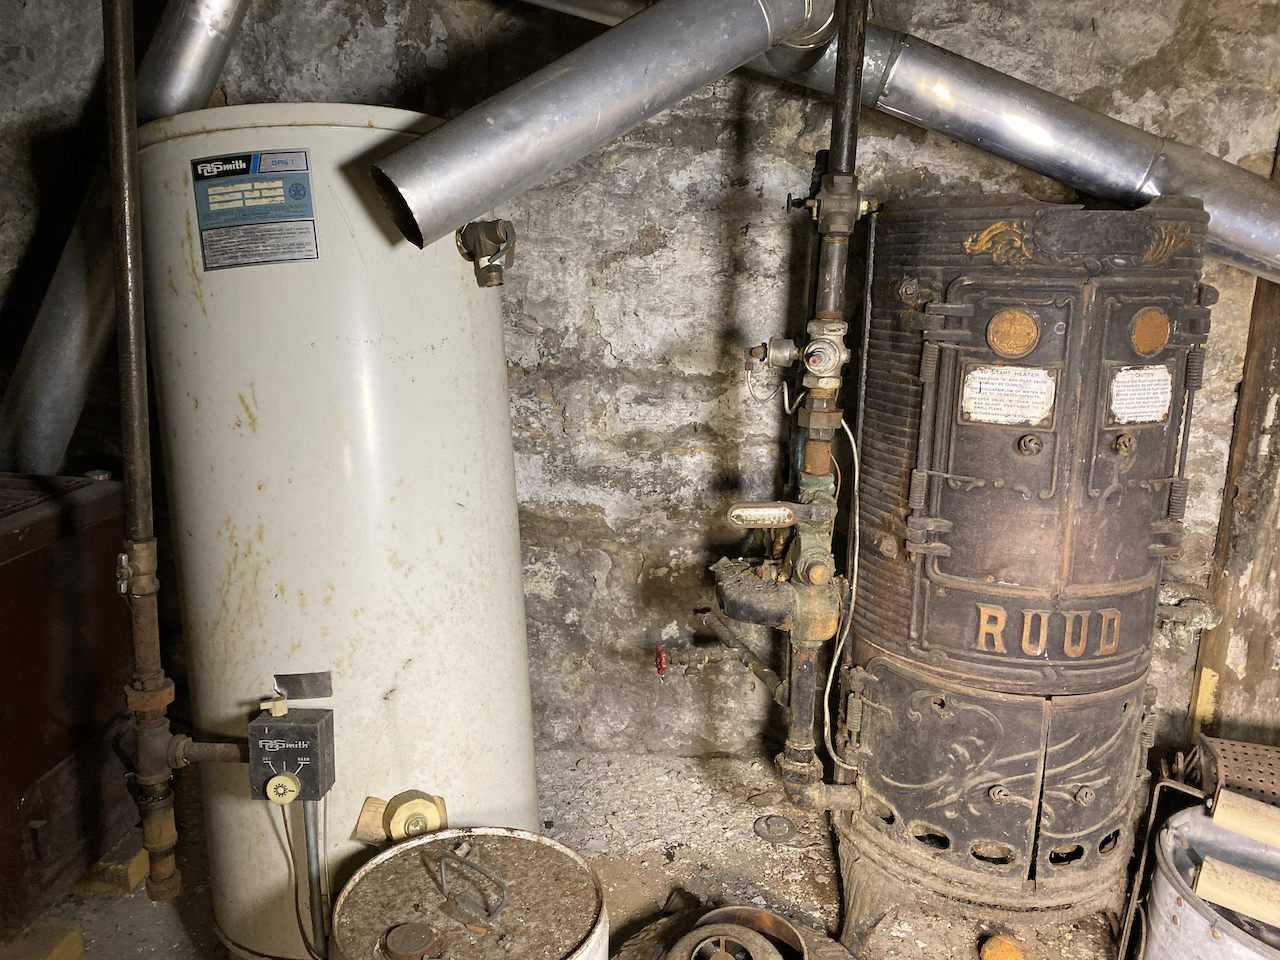 ruud-water-heater-once-occupied